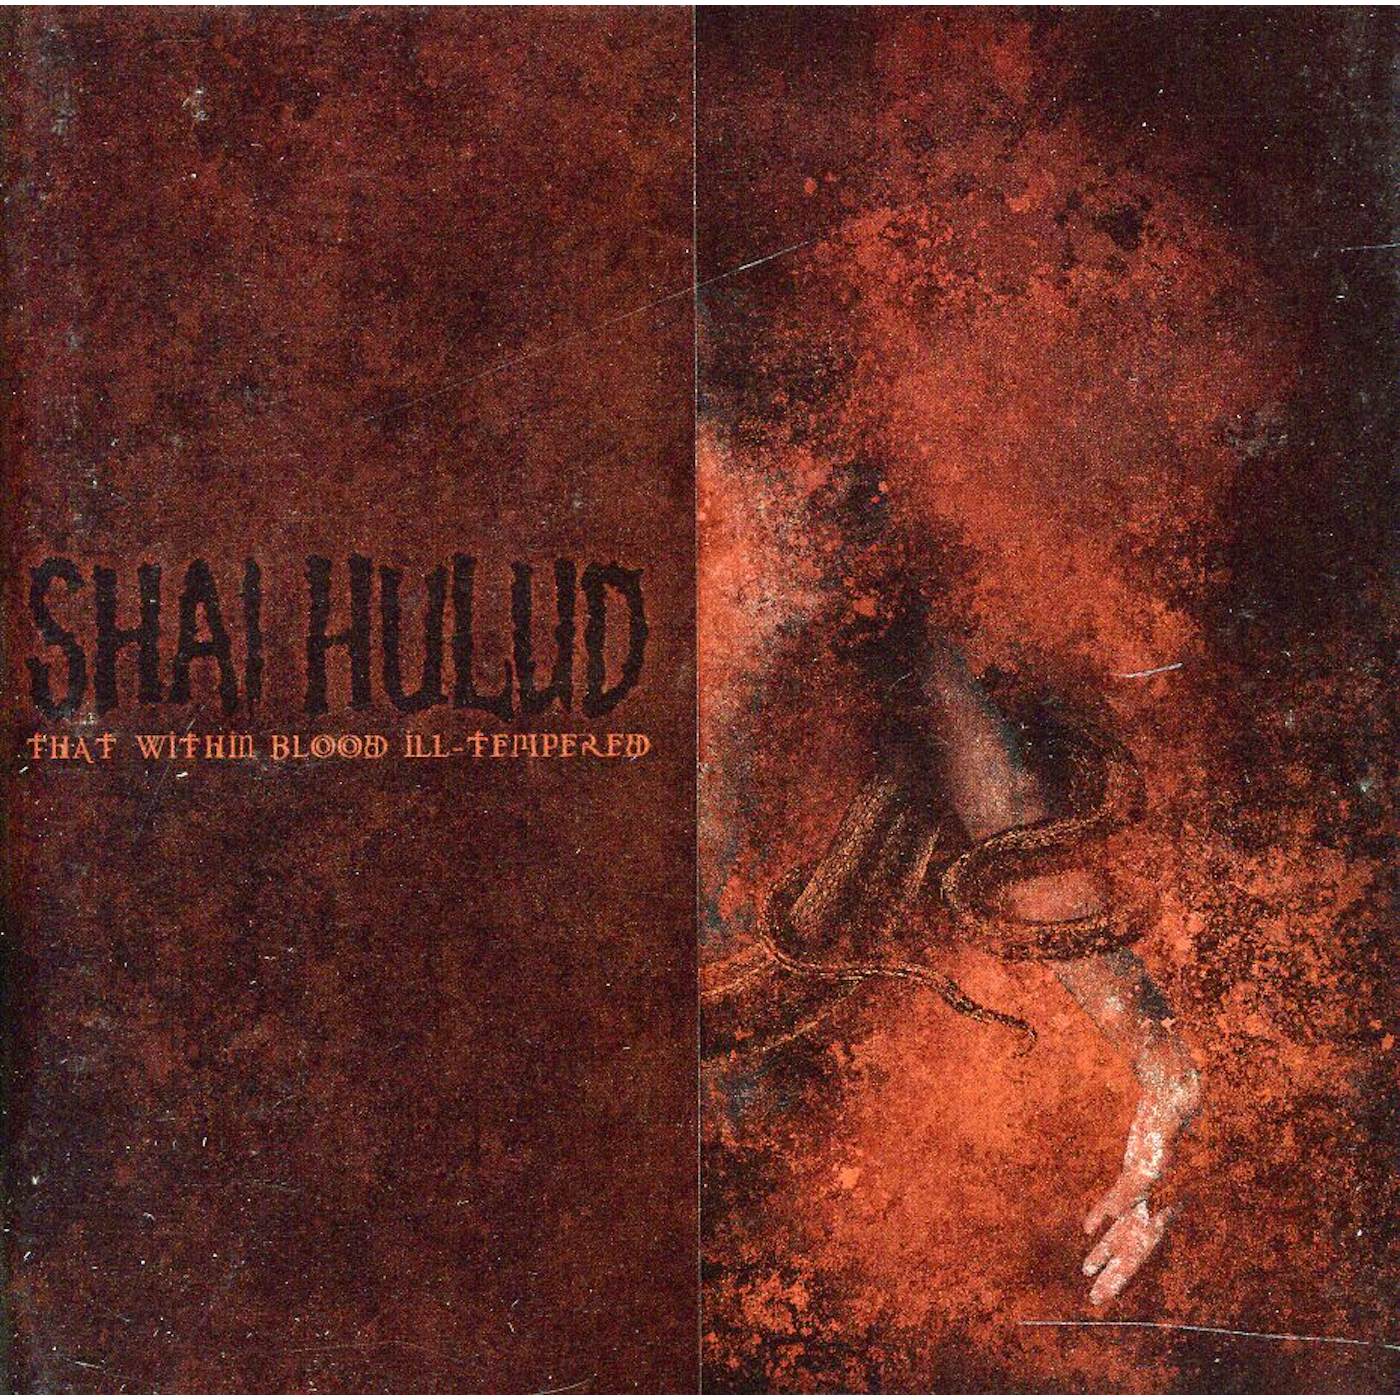 Shai Hulud THAT WITHIN BLOOD ILL: TEMPERED CD